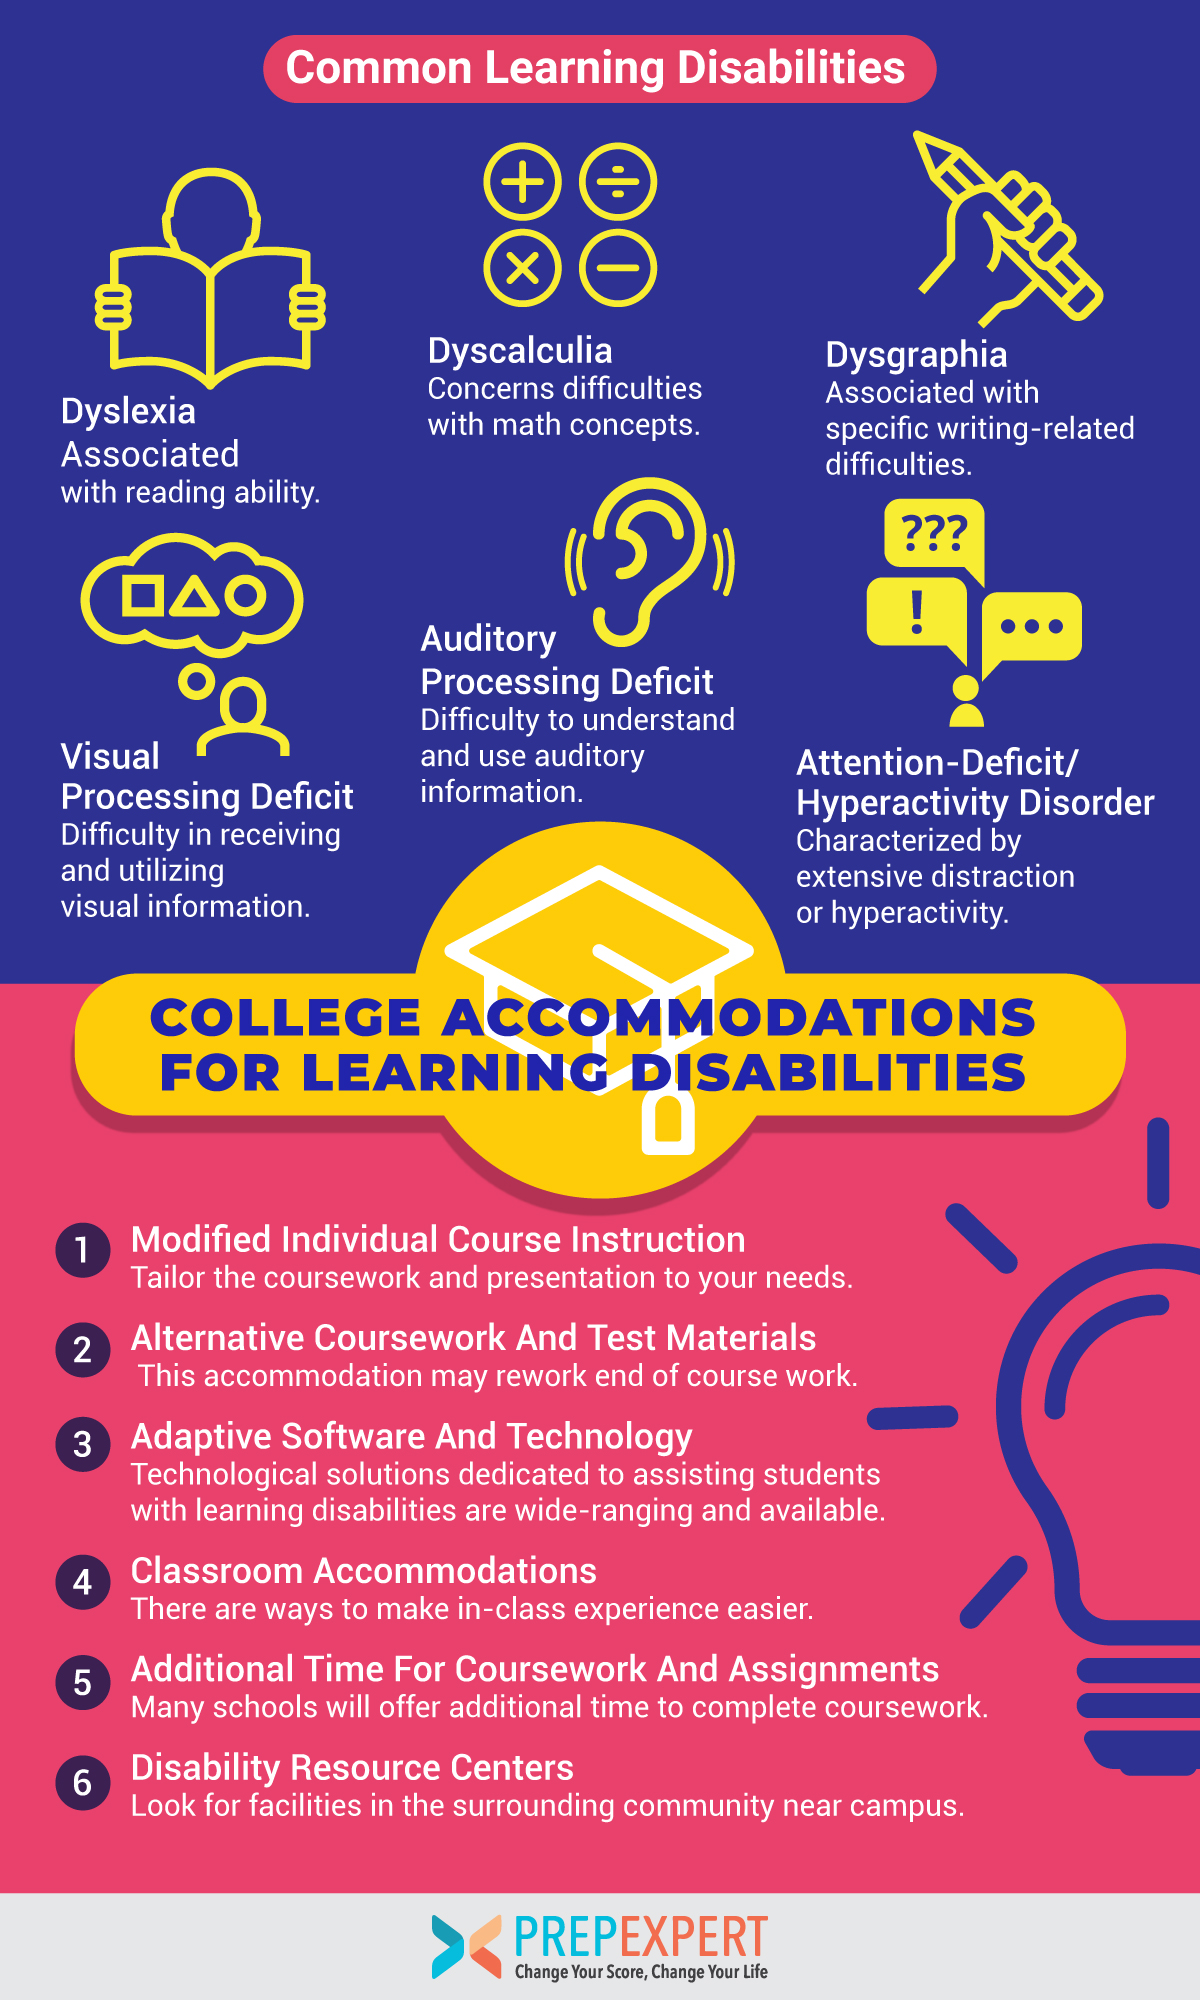 Poster listing 6 common learning disabilities: dyslexia, dysgraphia, dyscalculia, visual processing deficit, auditory processing deficit, and Attention Deficit Hyperactivity Disorder. Below are 6 accommodations commonly requested by people with those disabilities.